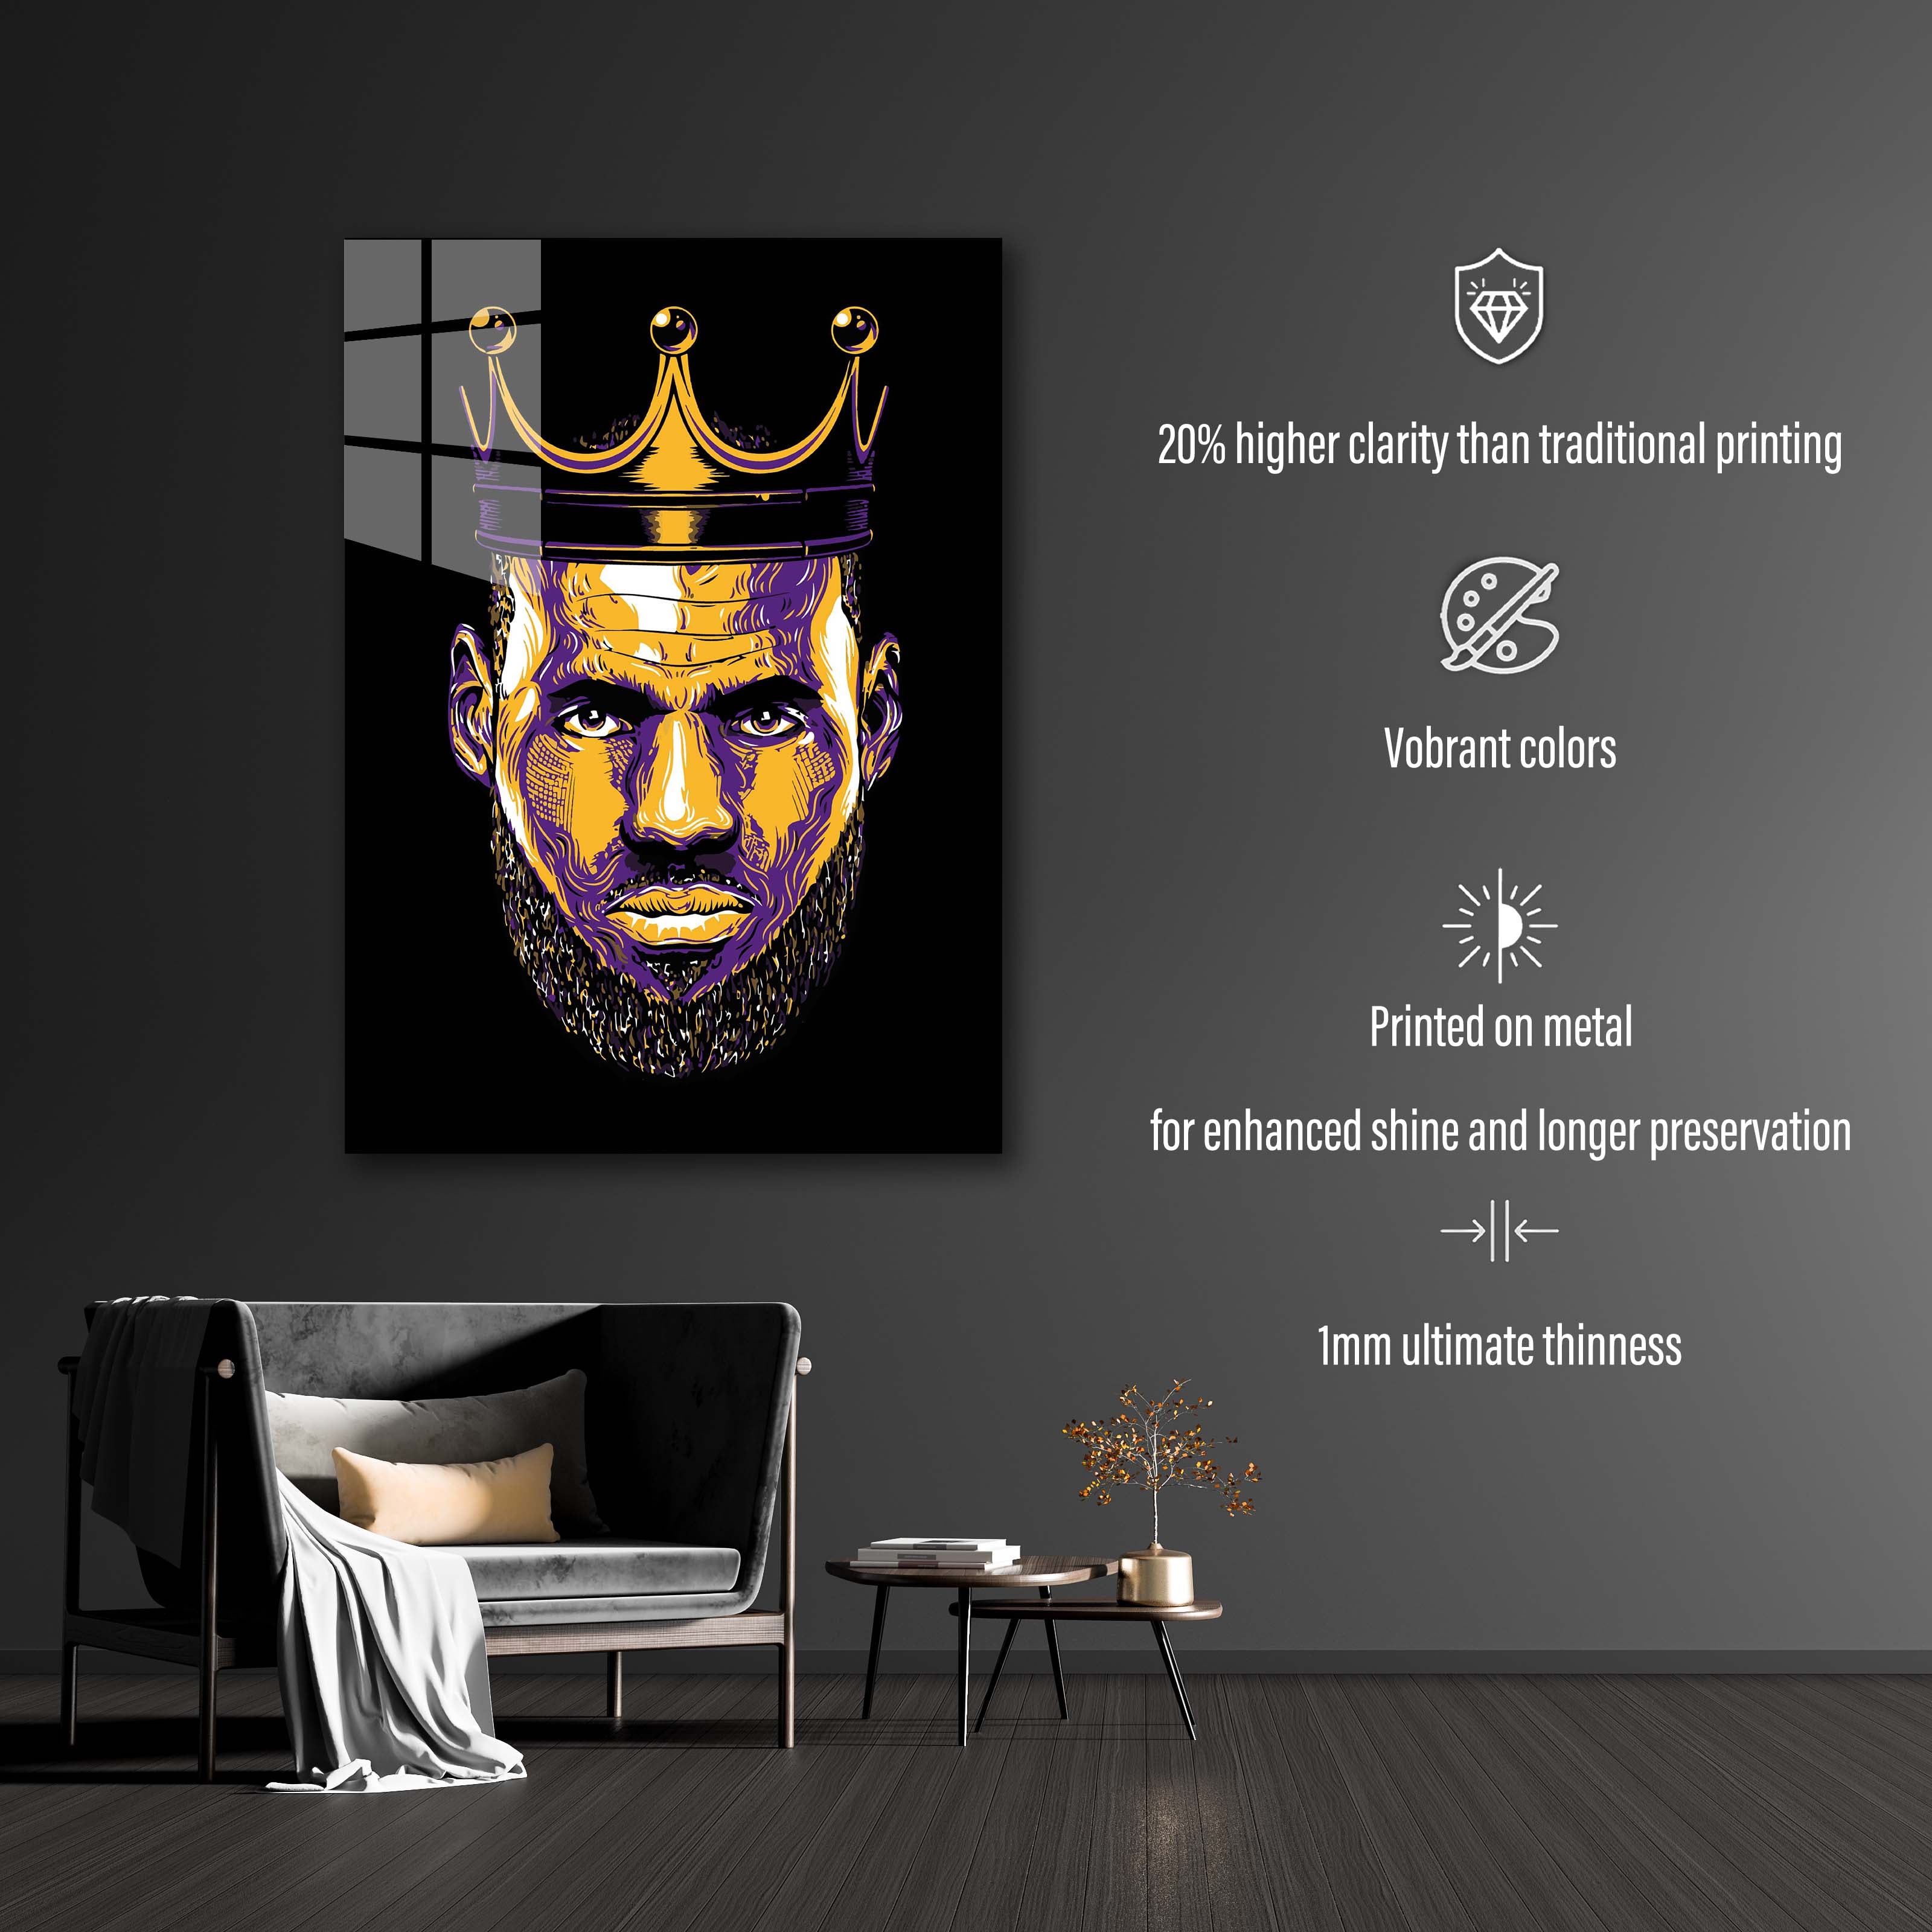 King Lebron-designed by @My Kido Art